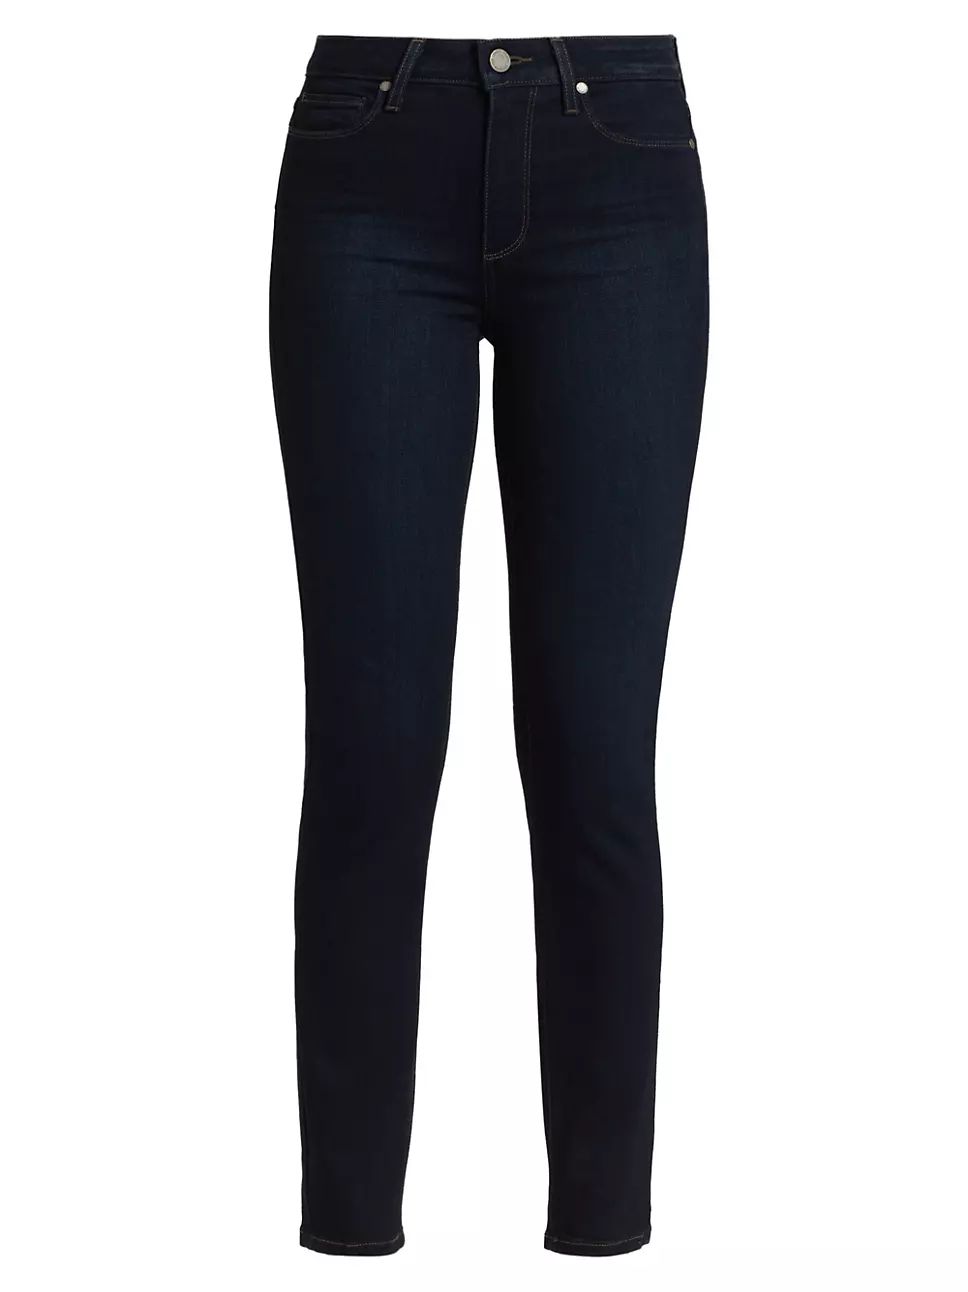 Paige Hoxton High-Rise Skinny Ankle Jeans | Saks Fifth Avenue